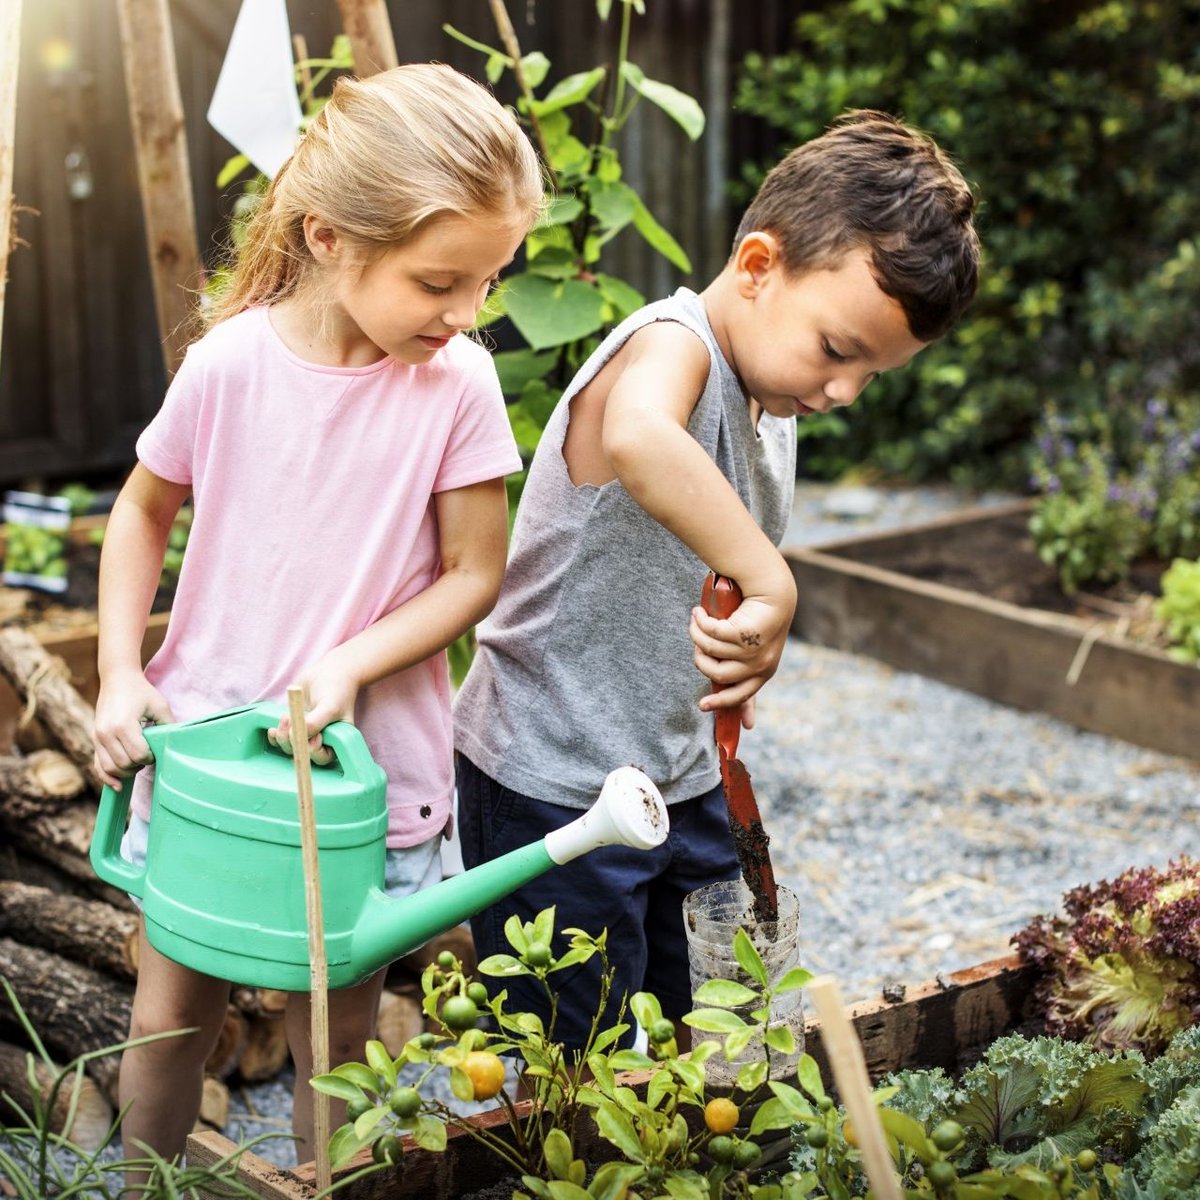 Whether they want to play, grow, take it from plant to plate, be an eco warrior, or just experience the joy of gardening. Take inspiration from our collection of books that can be the first step on that journey this #NationalGardeningWeek: l8r.it/UC1f